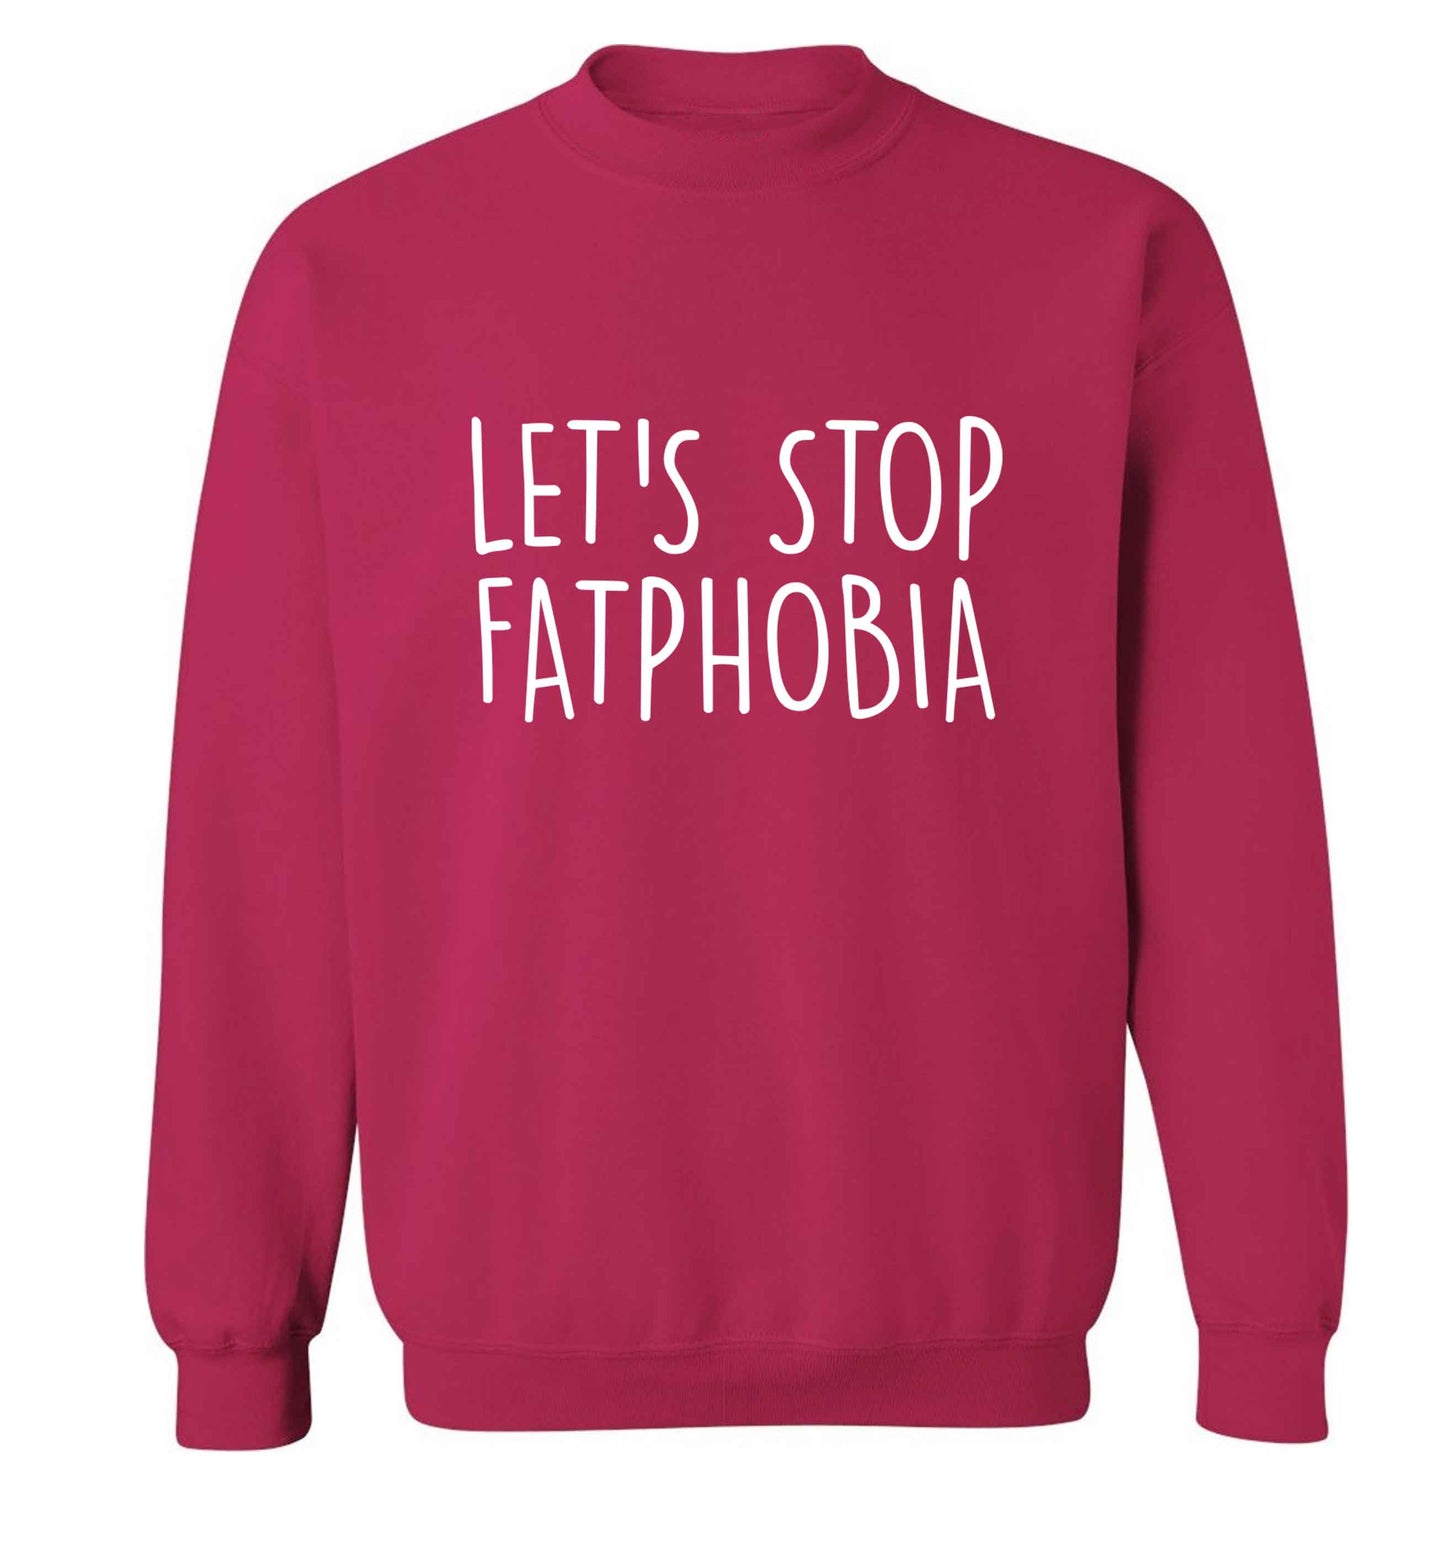 Let's stop fatphobia adult's unisex pink sweater 2XL